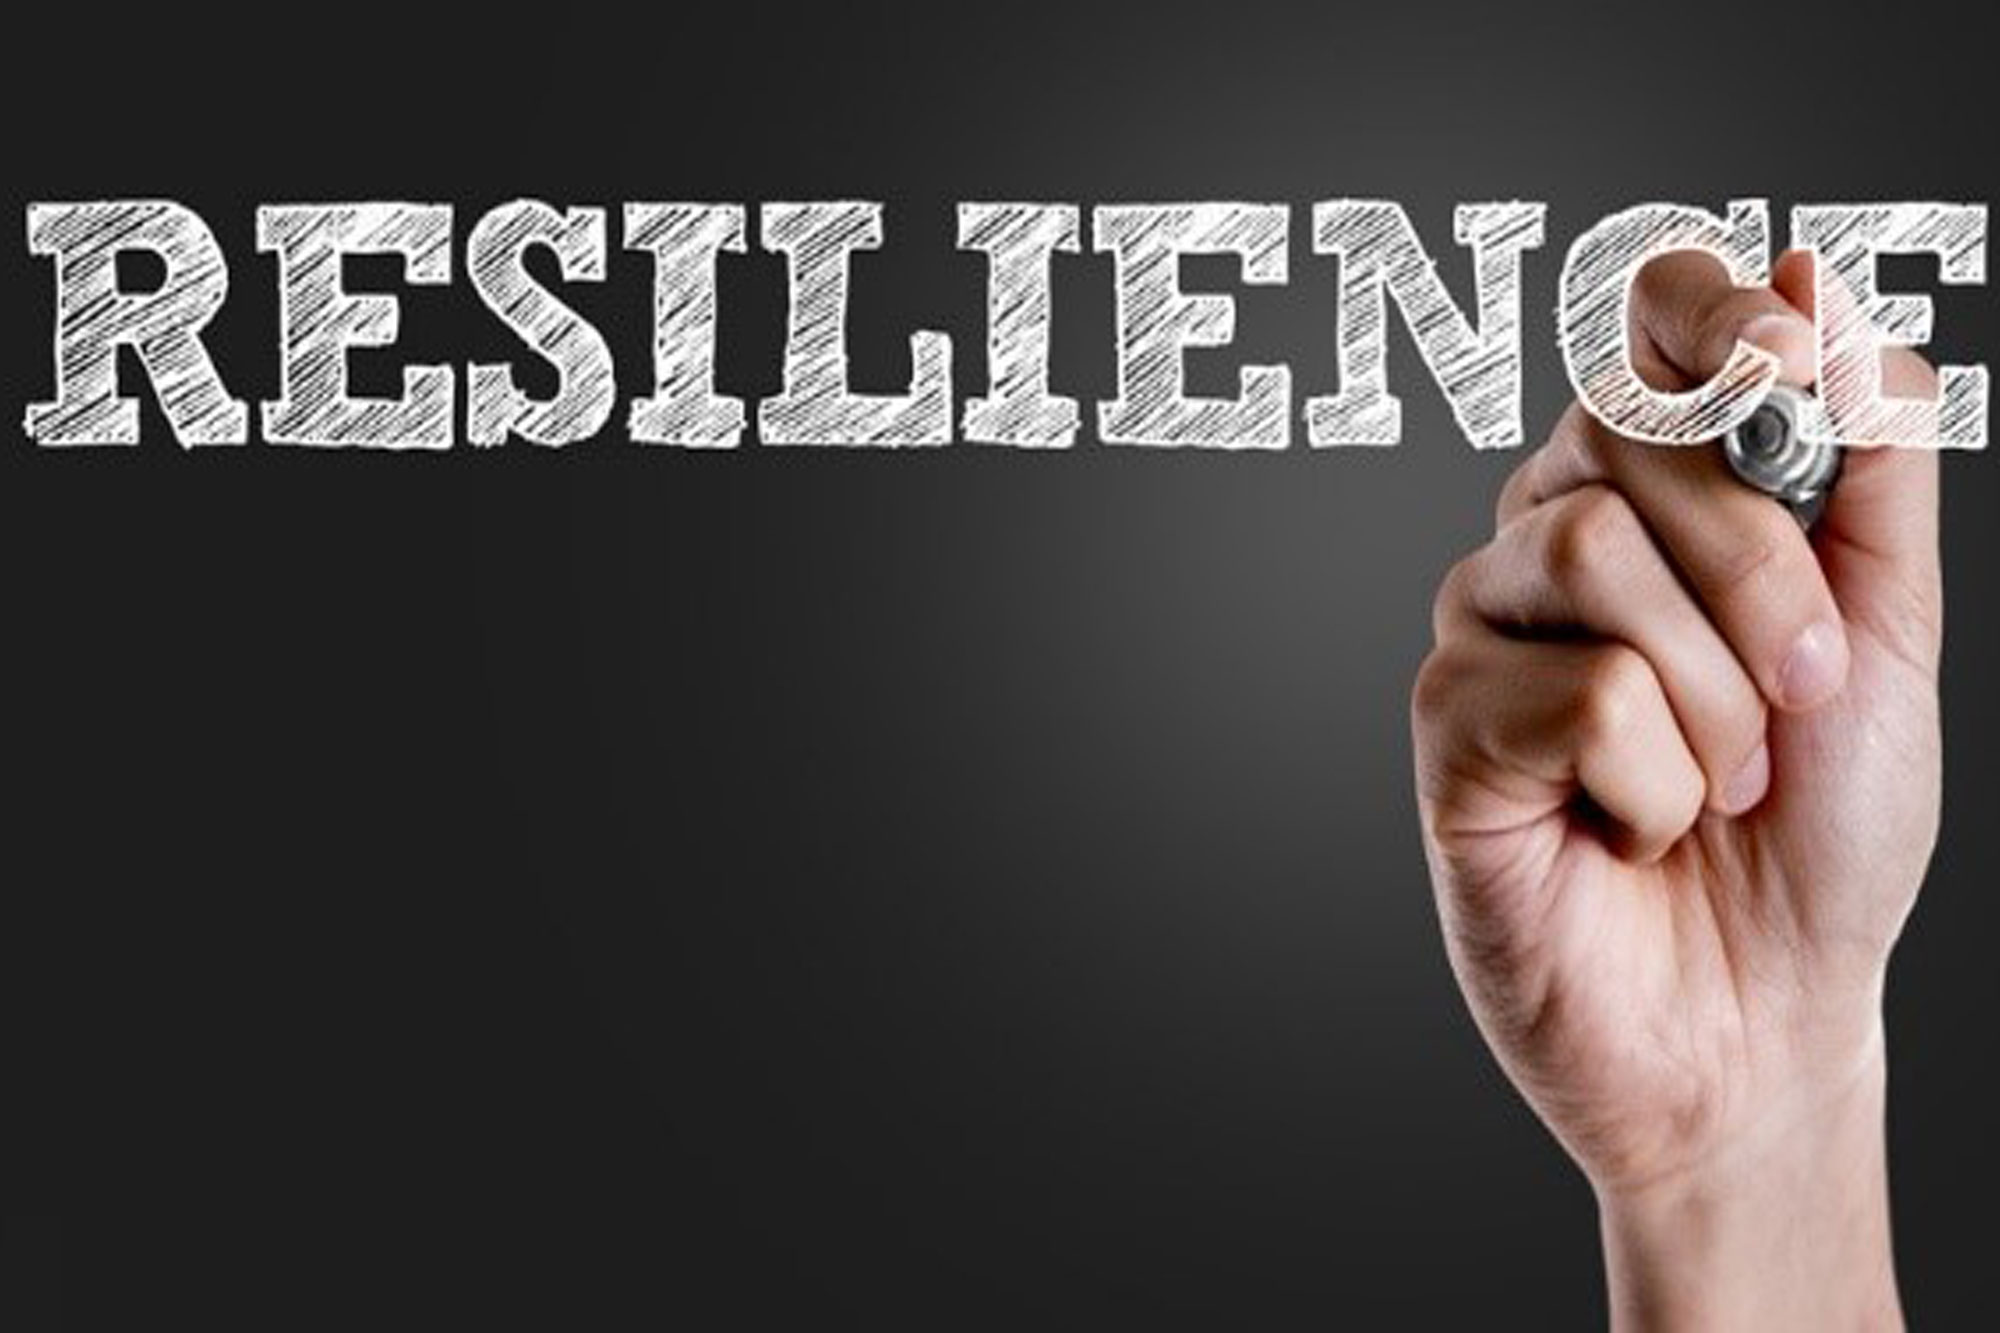 Resilience text with image of a strong, clenched fist